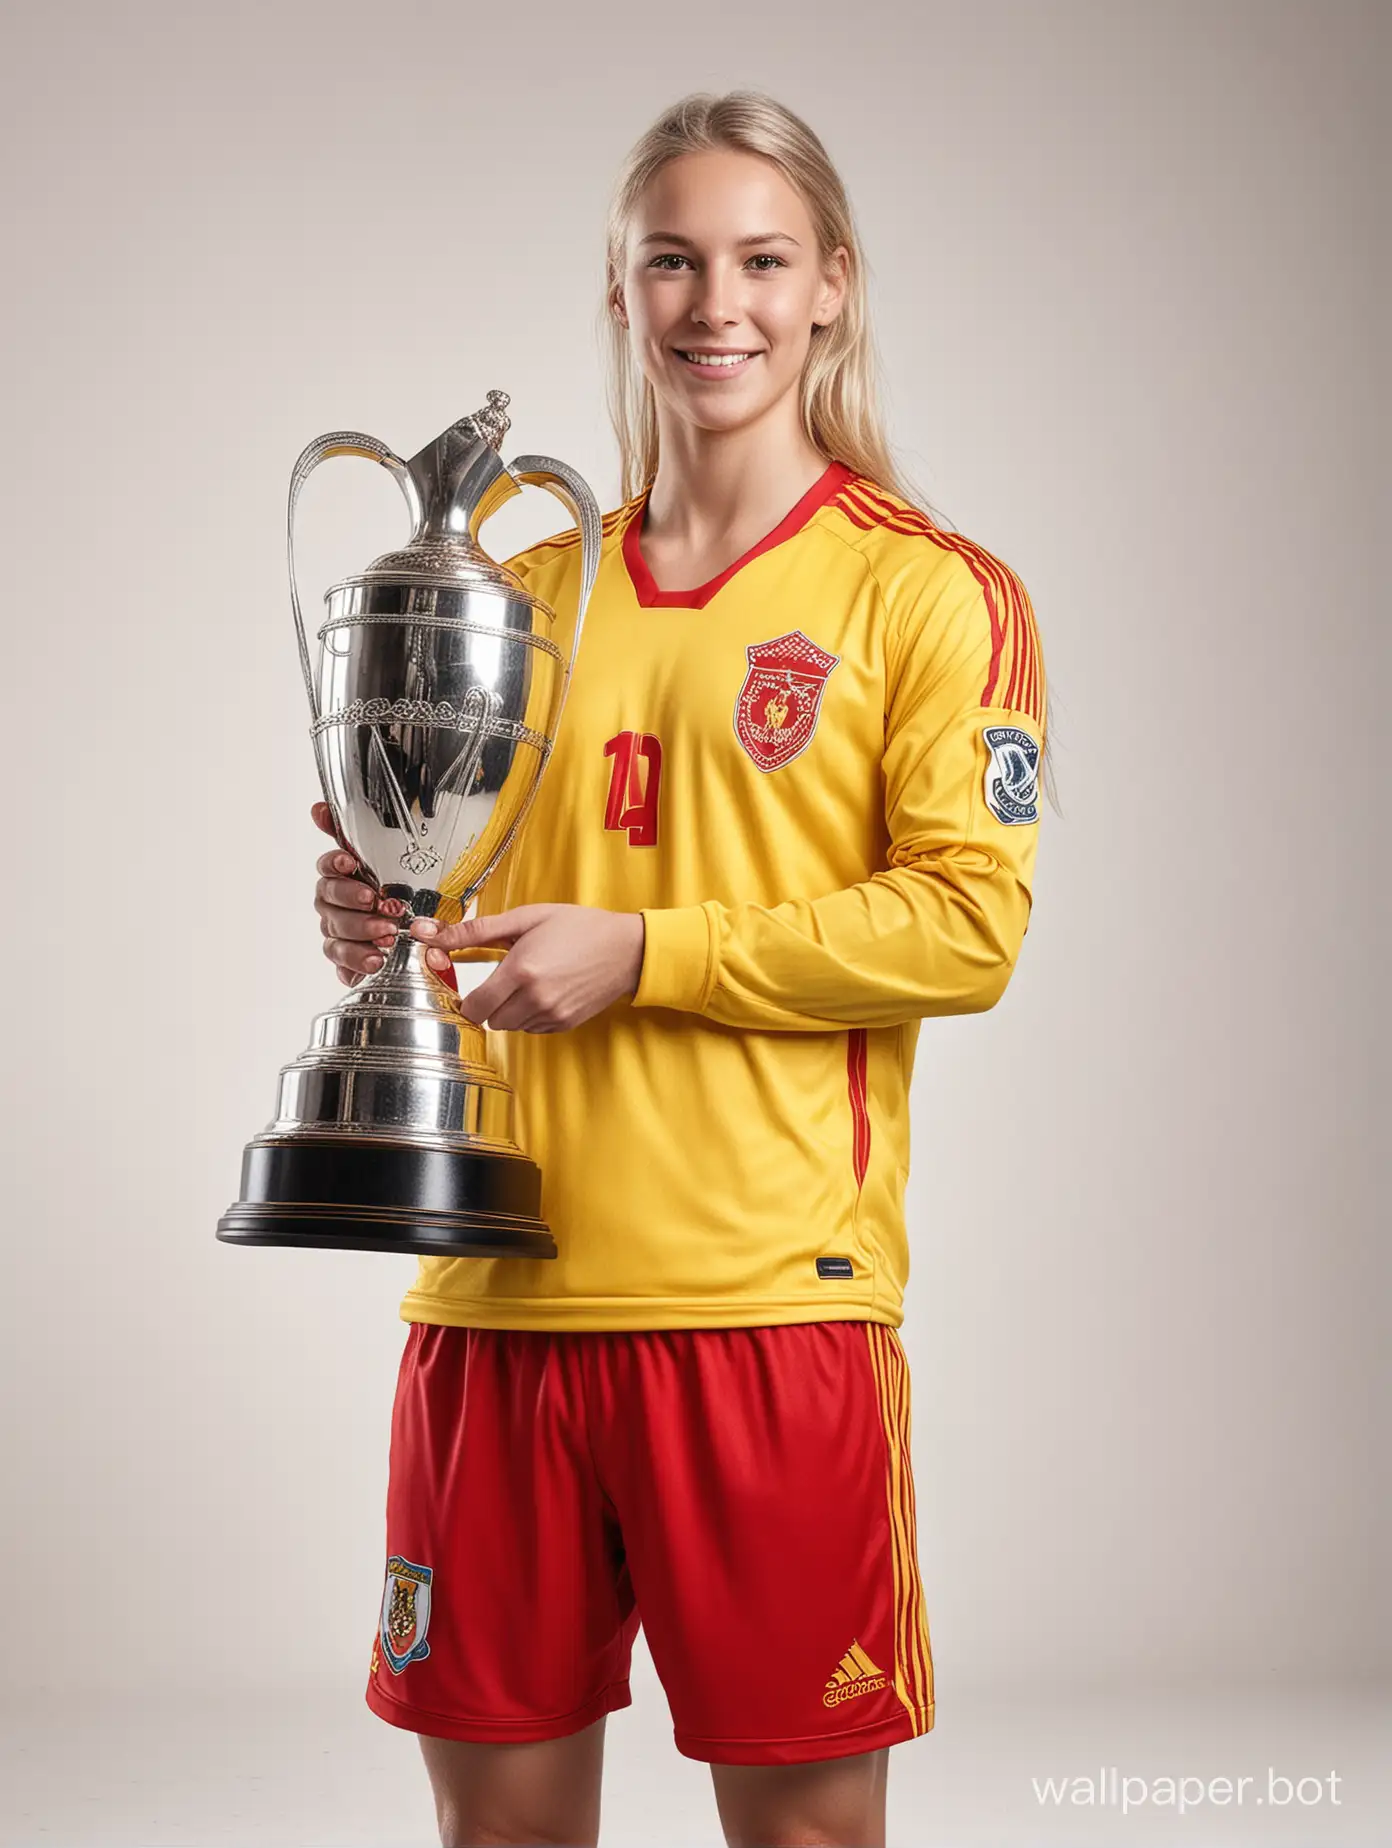 Vibrant-Soccer-Star-with-Trophy-Danish-Athlete-in-Iconic-Red-and-Yellow-Kit